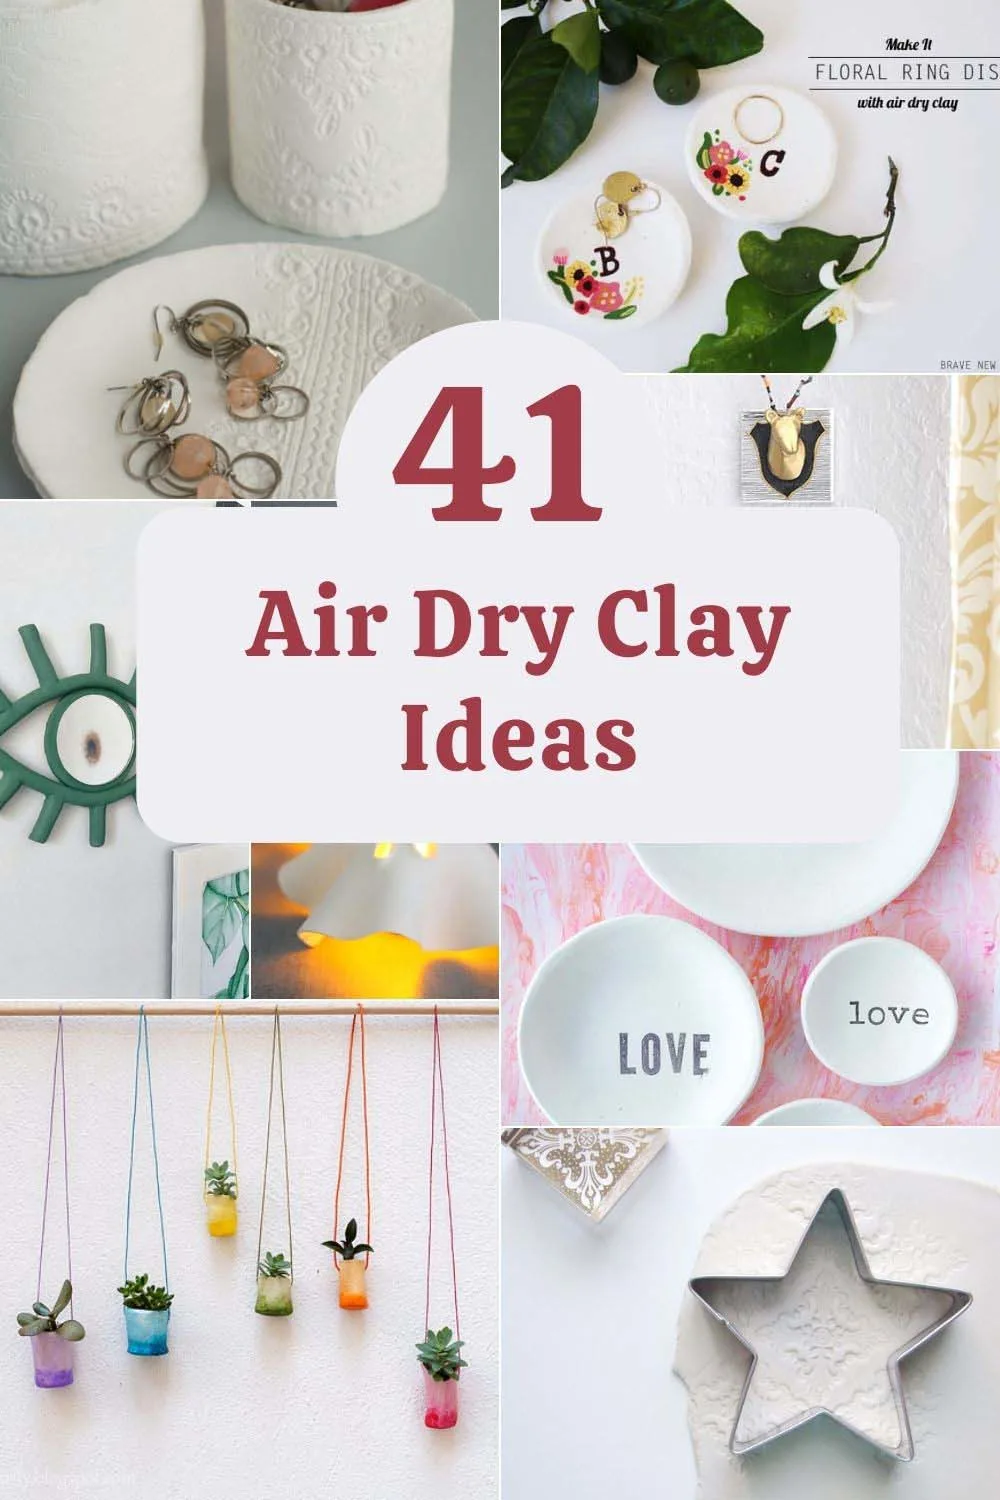 41 air dry clay ideas to try